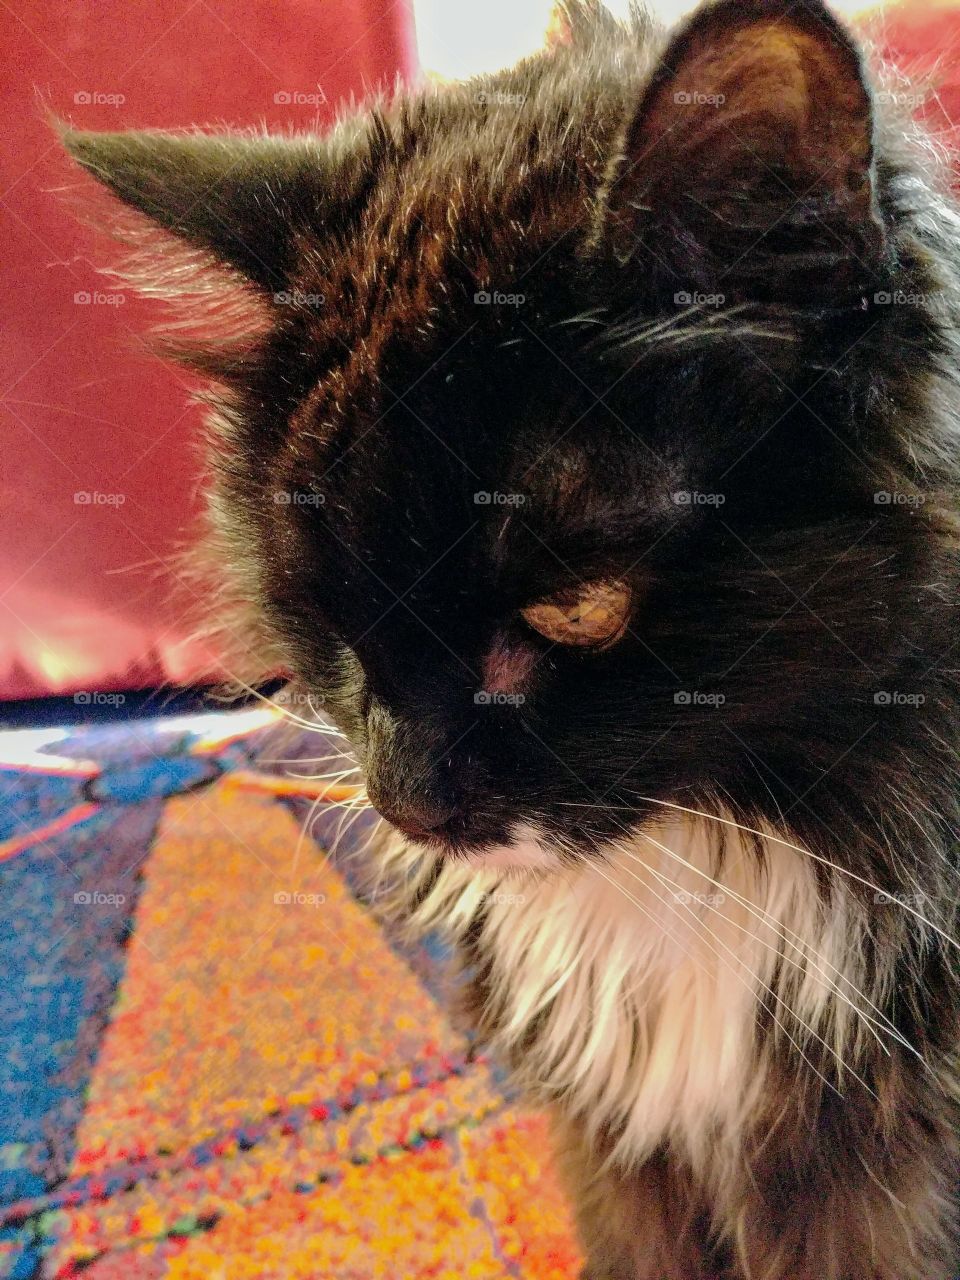 This is kittywitty, commonly called Kiwi. She is 20 years old with no signs of stopping besides the death rattle she calls a meow.